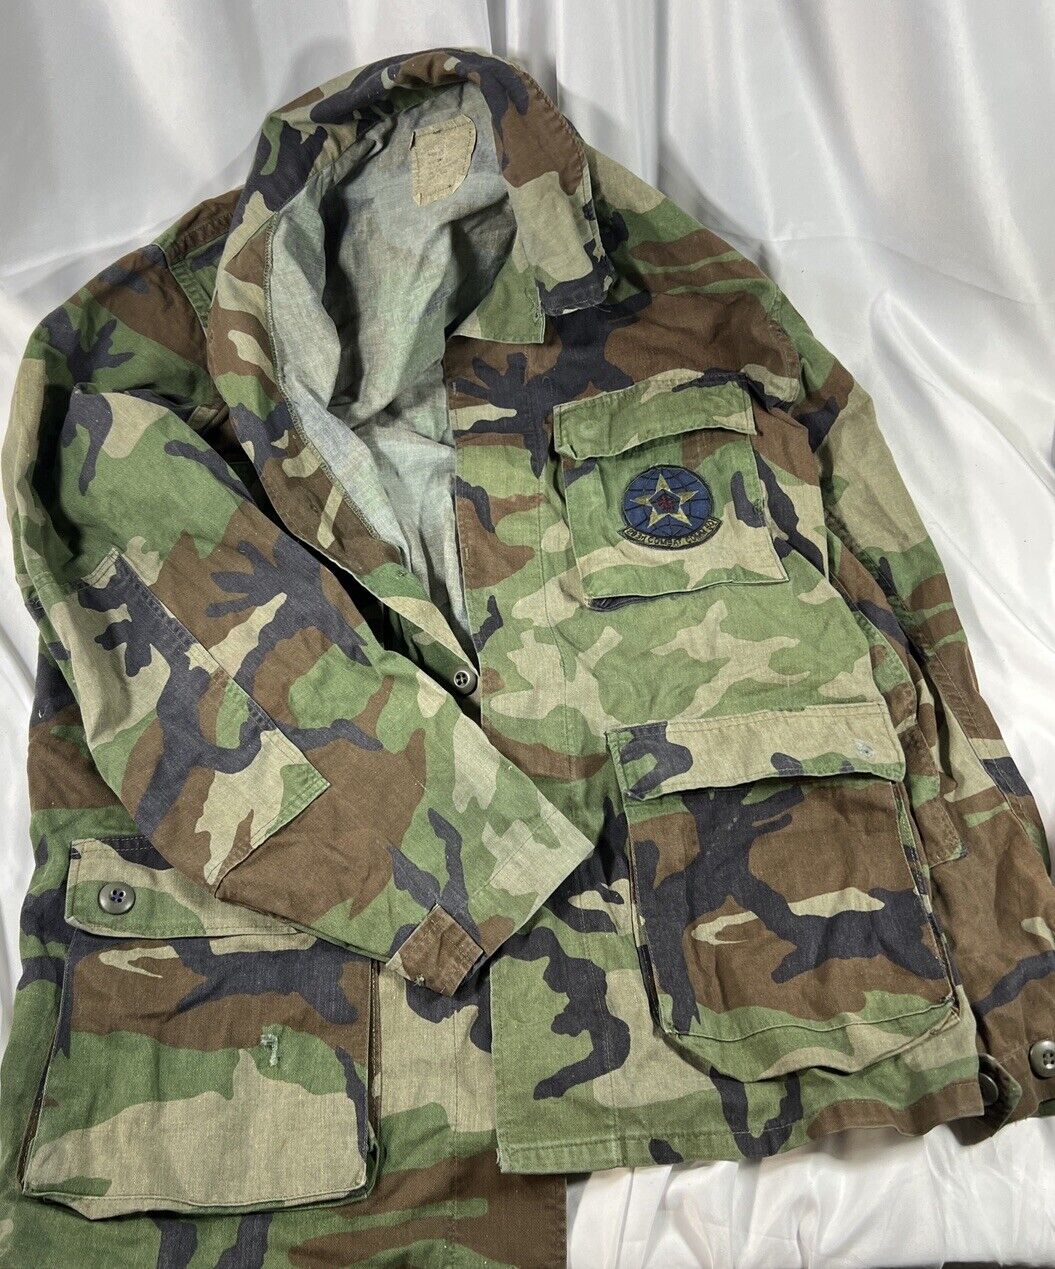 283Rd Compact Command Vintage Woodland Coat/Shirt with patches Medium